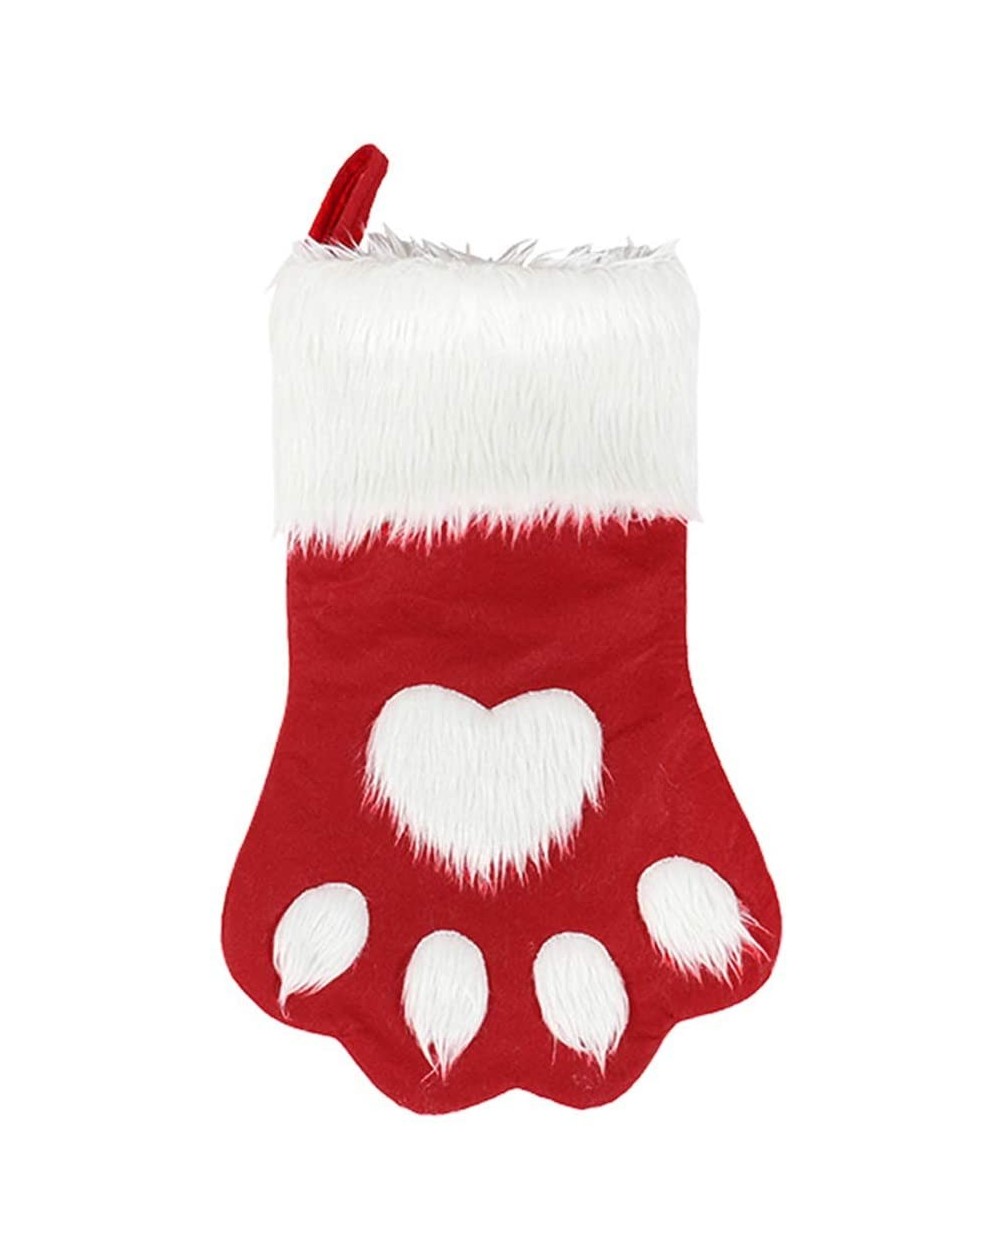 Stockings & Holders Dog Cat Paw Christmas Stockings- Plush Hanging Socks for Holiday and Christmas Decorations (Large/18in- W...